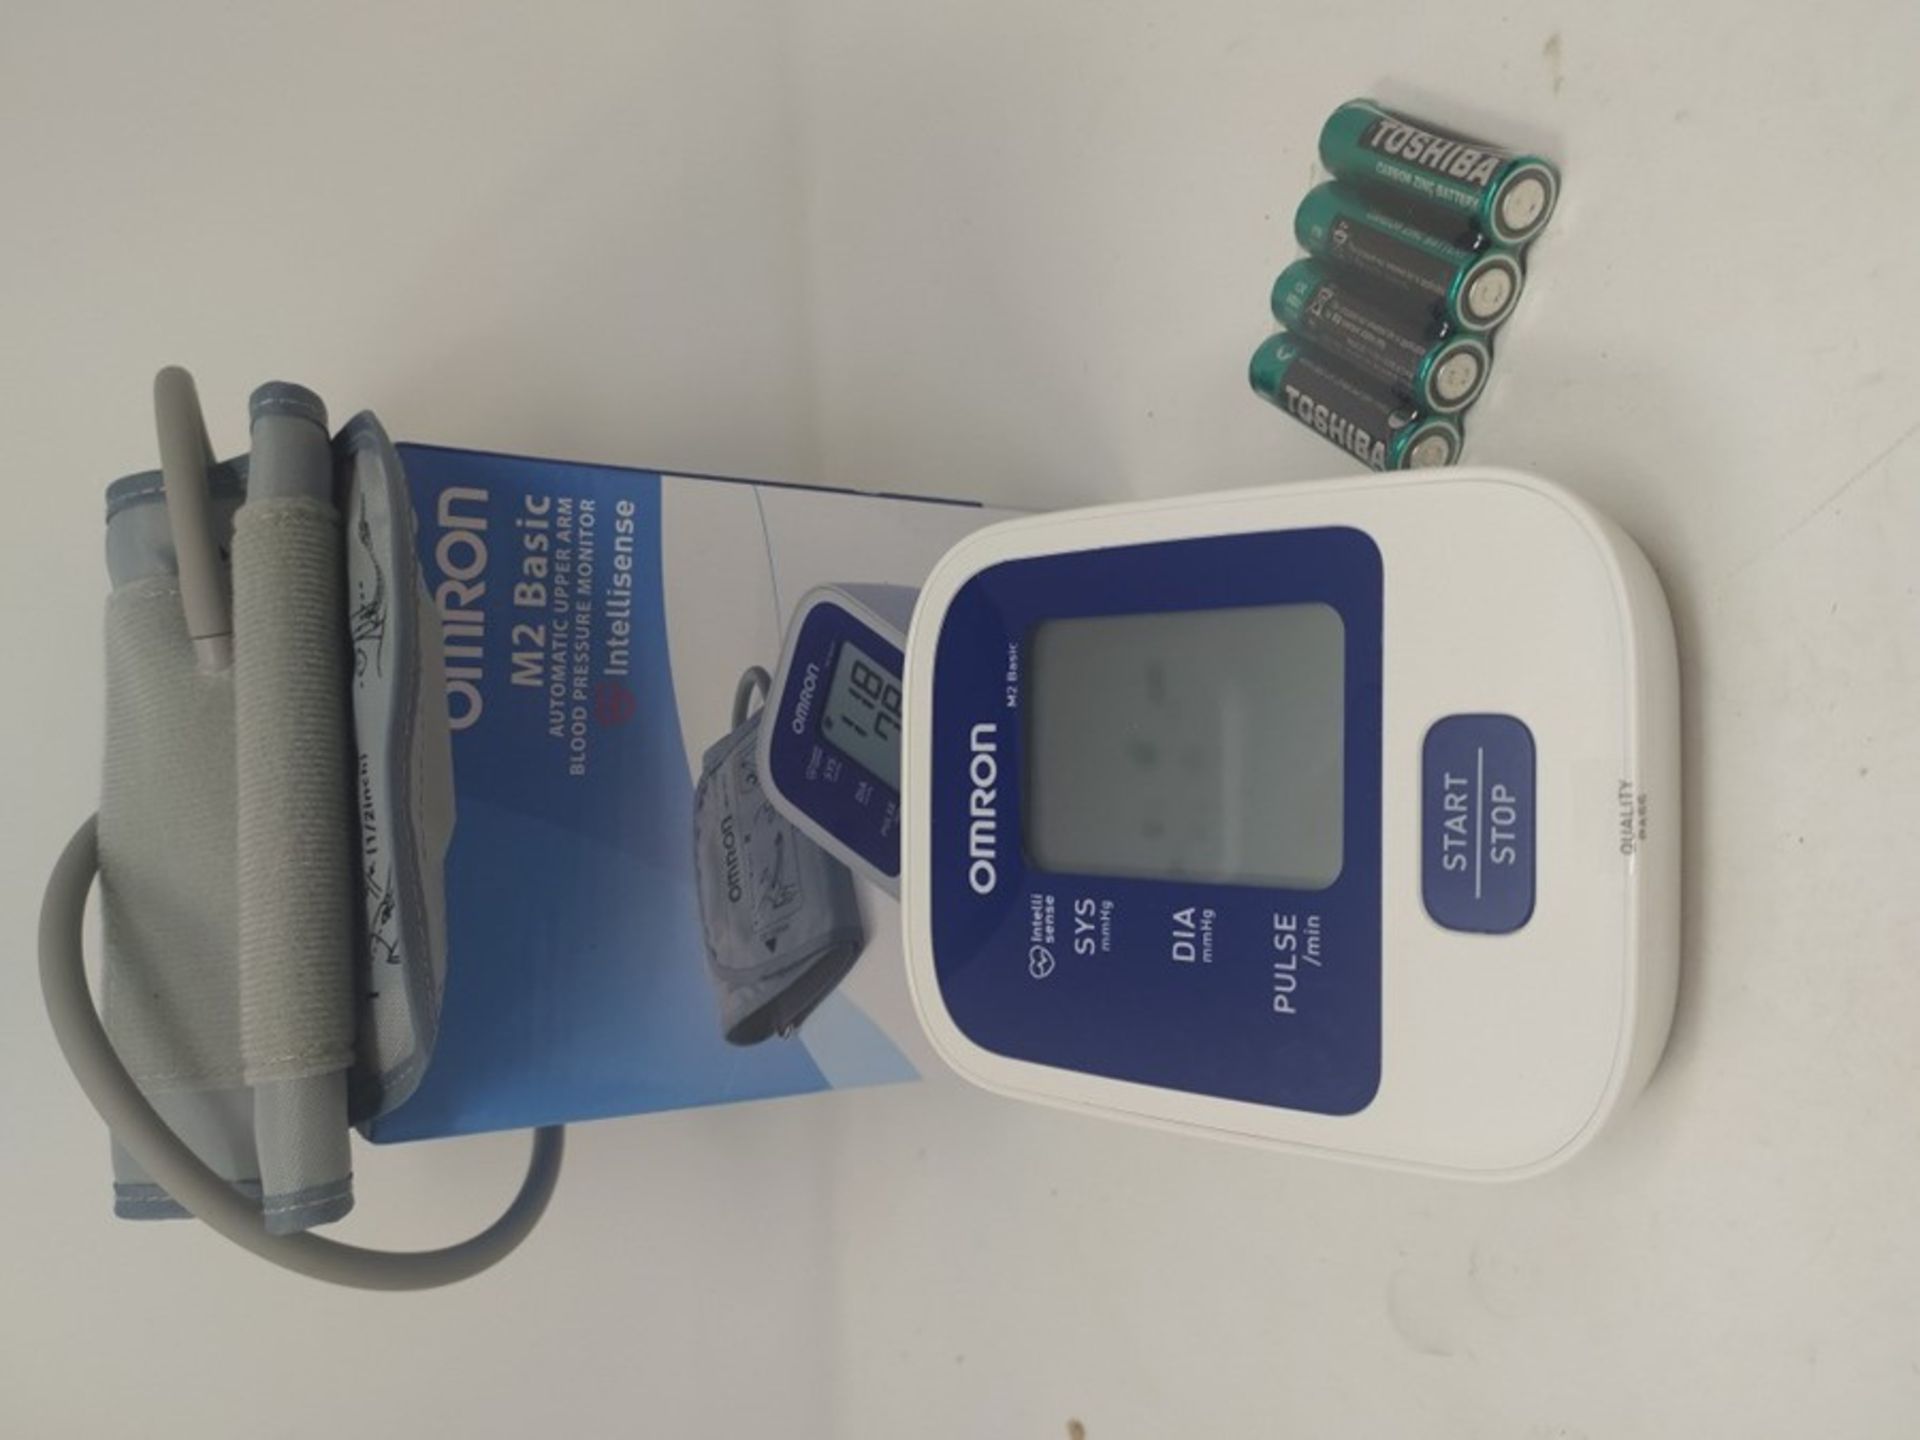 OMRON M2 Basic Blood Pressure Monitor for Upper Arm - Image 2 of 2